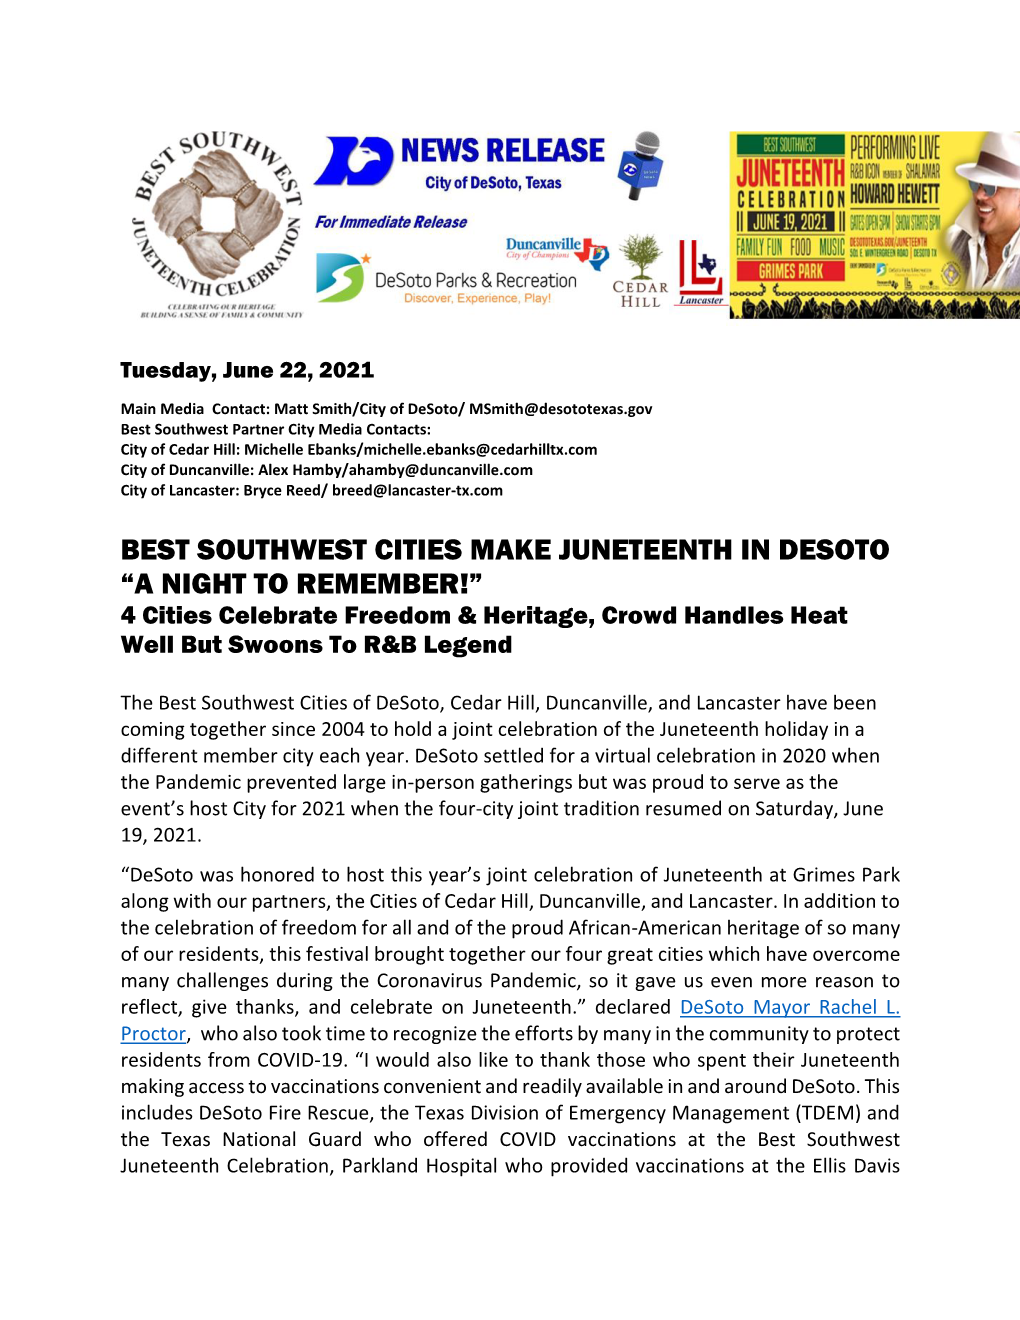 BEST SOUTHWEST CITIES MAKE JUNETEENTH in DESOTO “A NIGHT to REMEMBER!” 4 Cities Celebrate Freedom & Heritage, Crowd Handles Heat Well but Swoons to R&B Legend